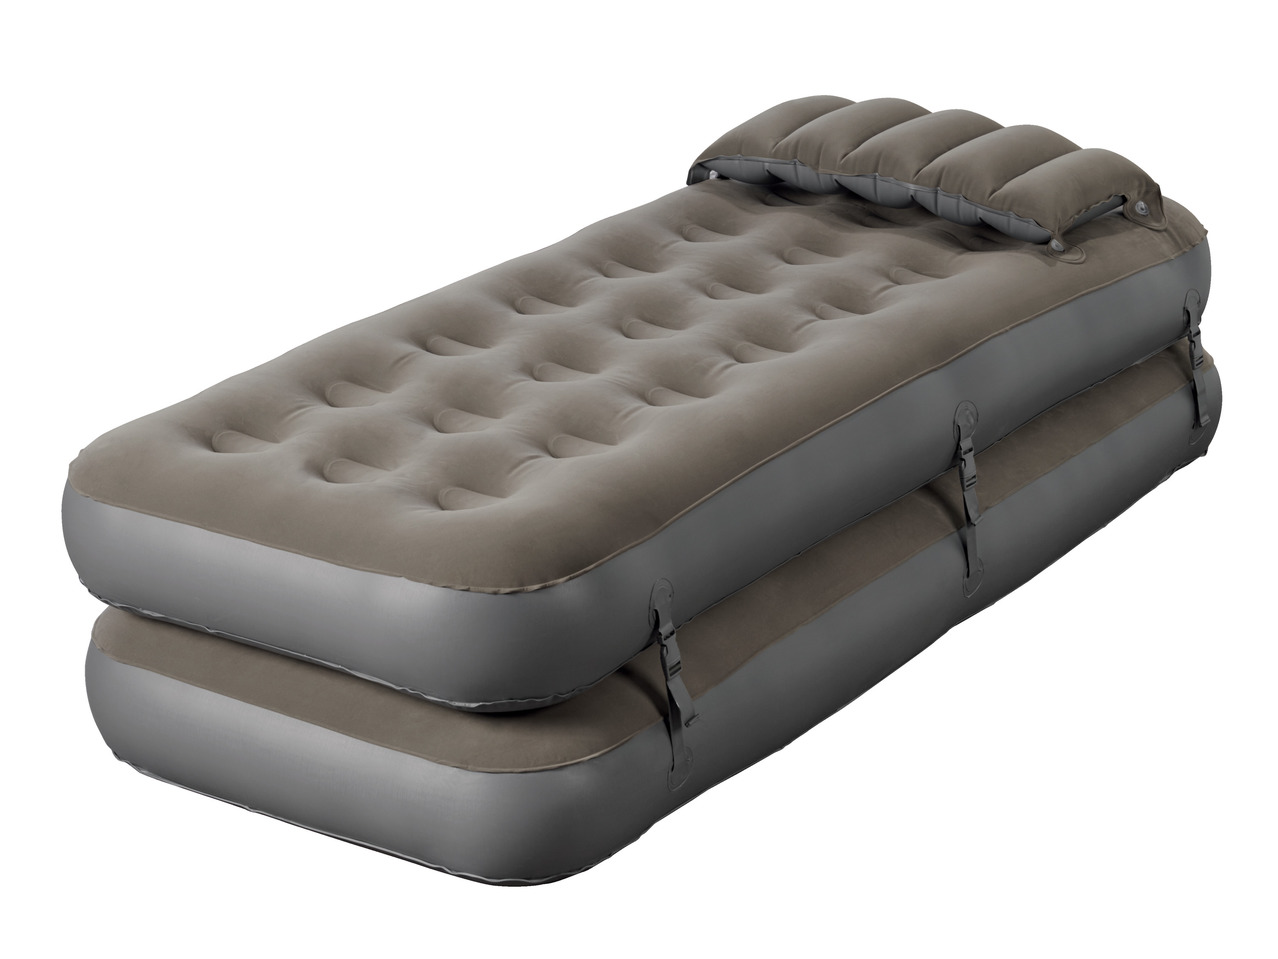 MERADISO 3-in-1 Airbed